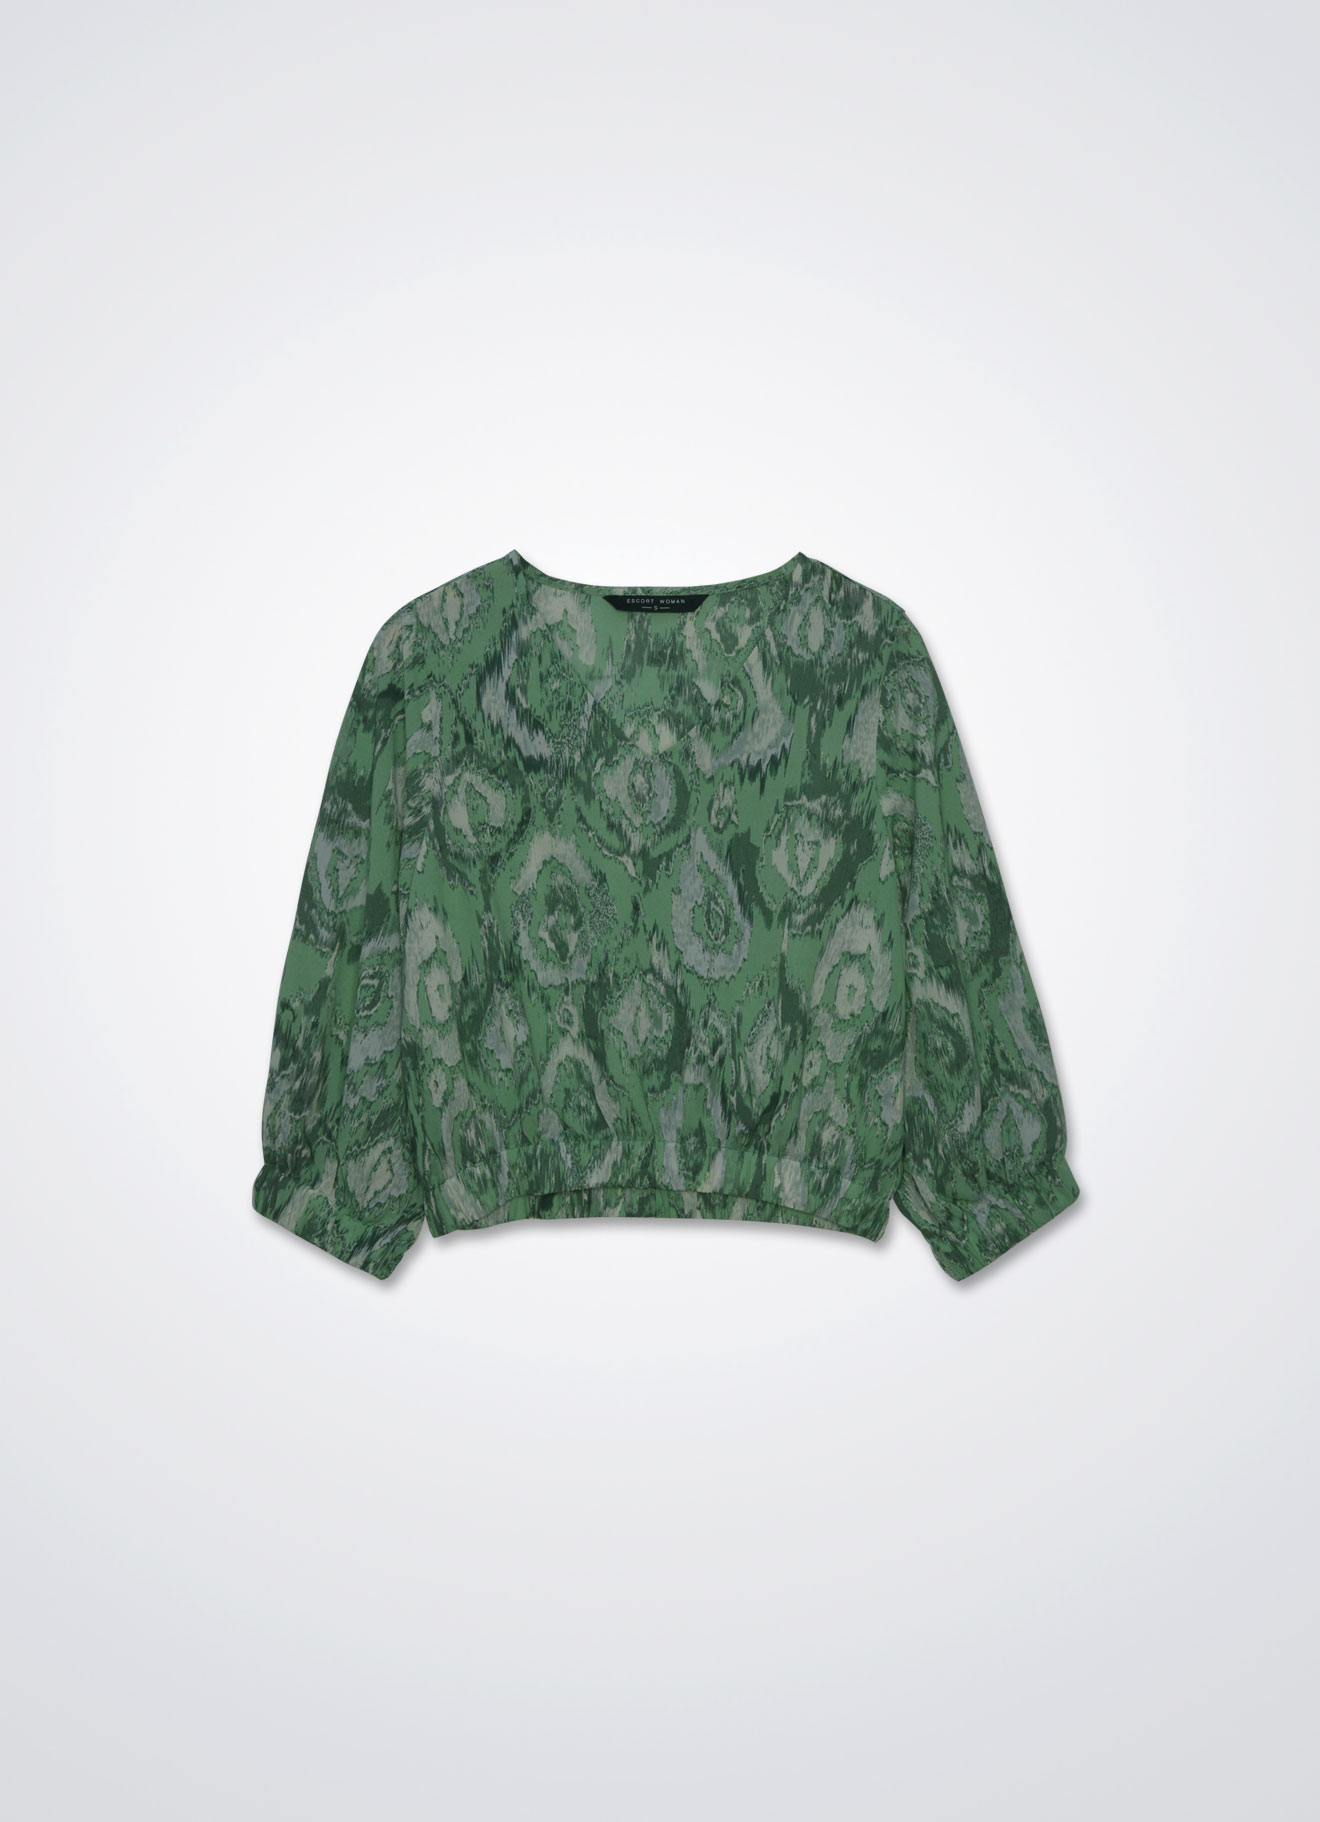 Greenbriar by Sleeve Top